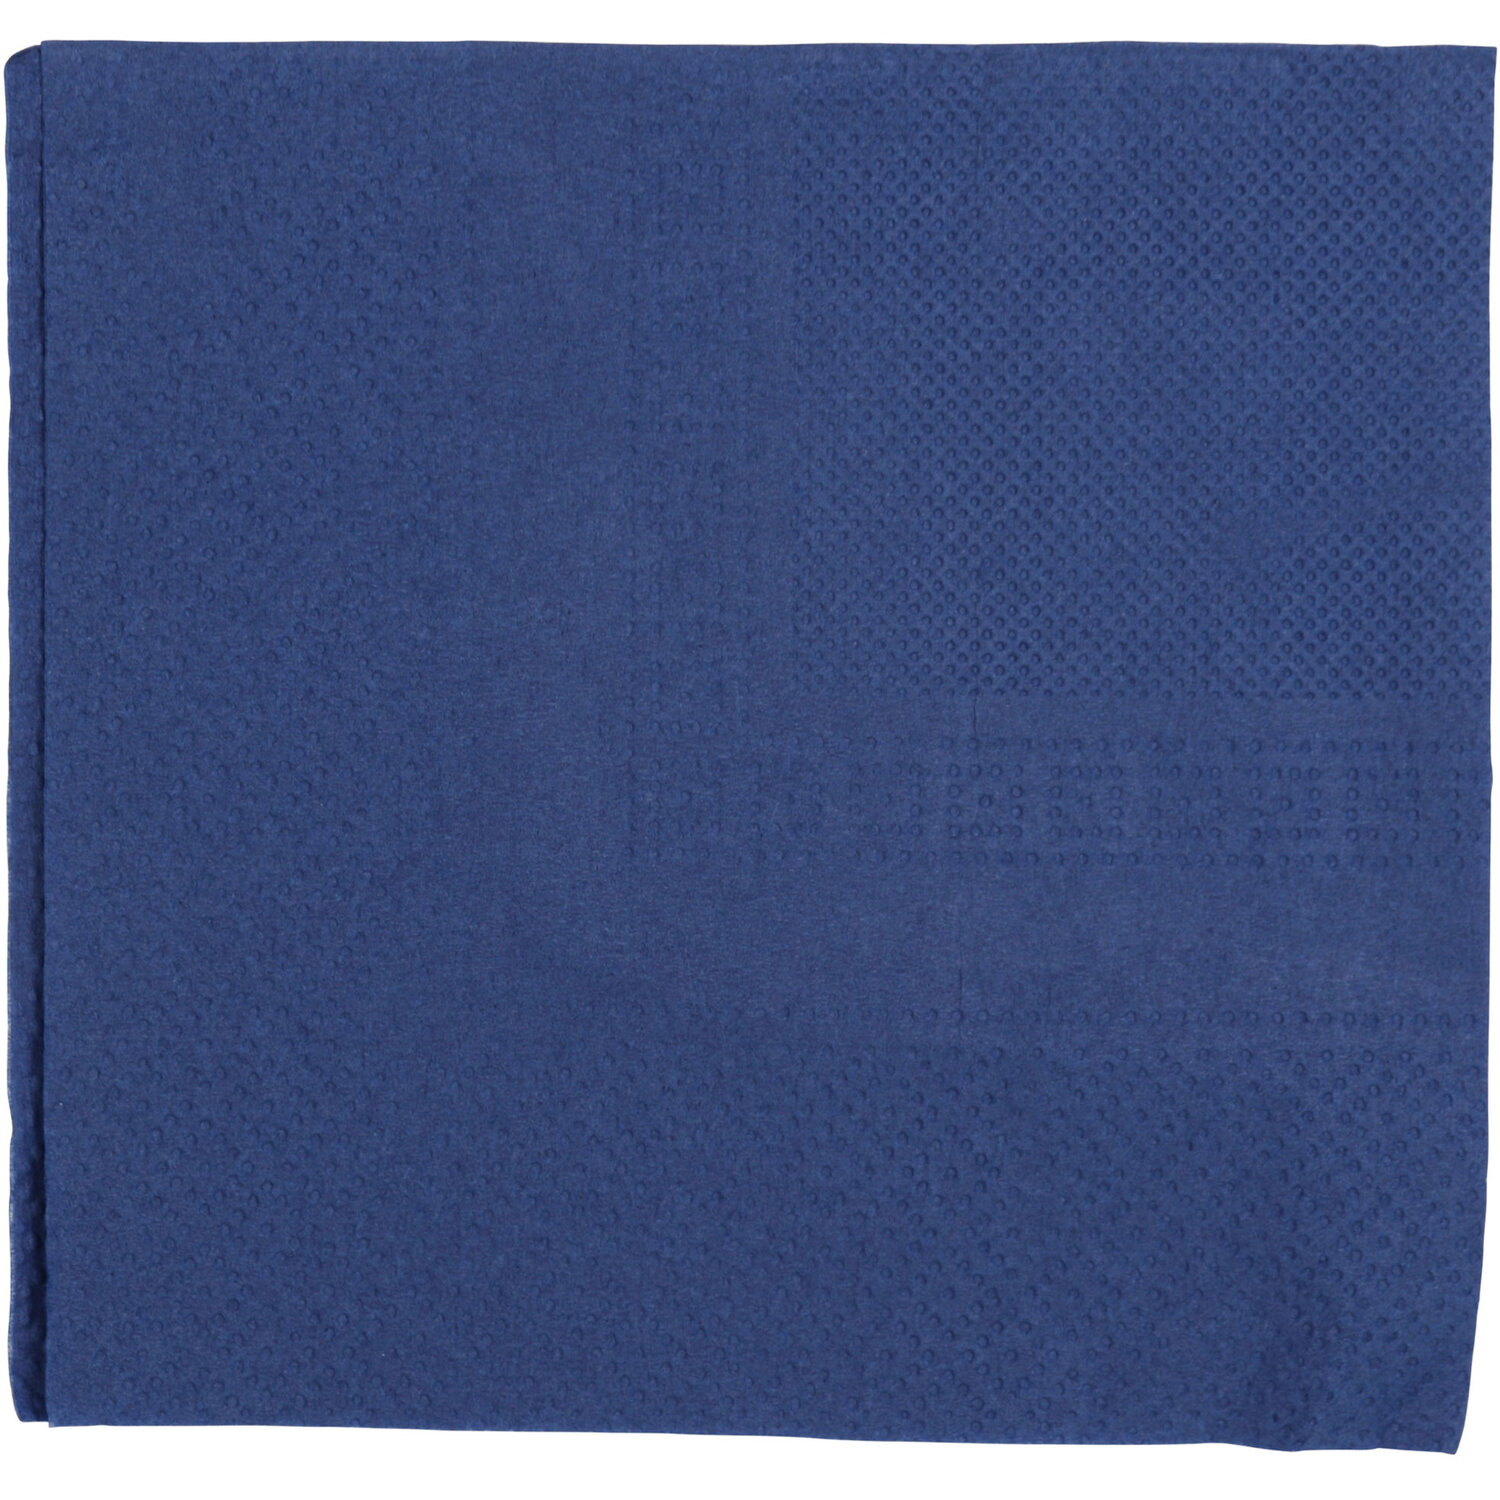 Pack of My Home Napkins - Blue Image 3